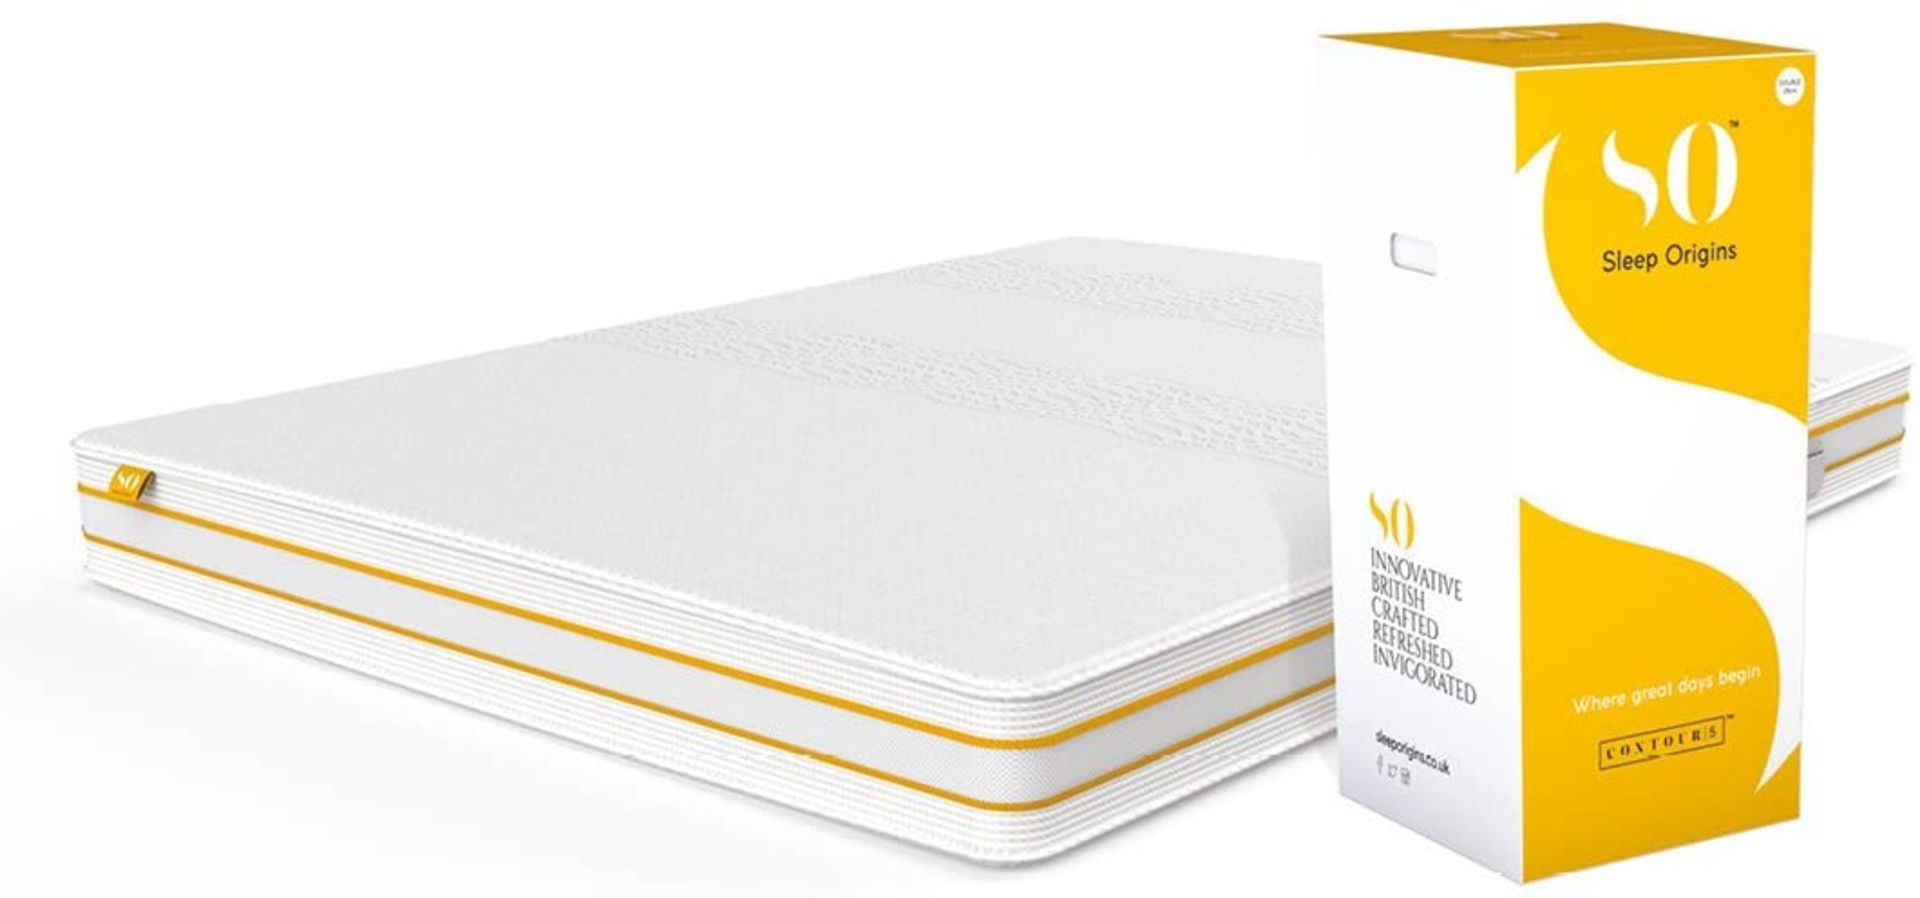 | 1X | SLEEP ORIGINS KING SIZE 15CM DEEP MATTRESS | NEW AND BOXED| NO ONLINE RESALE | RRP £499 |